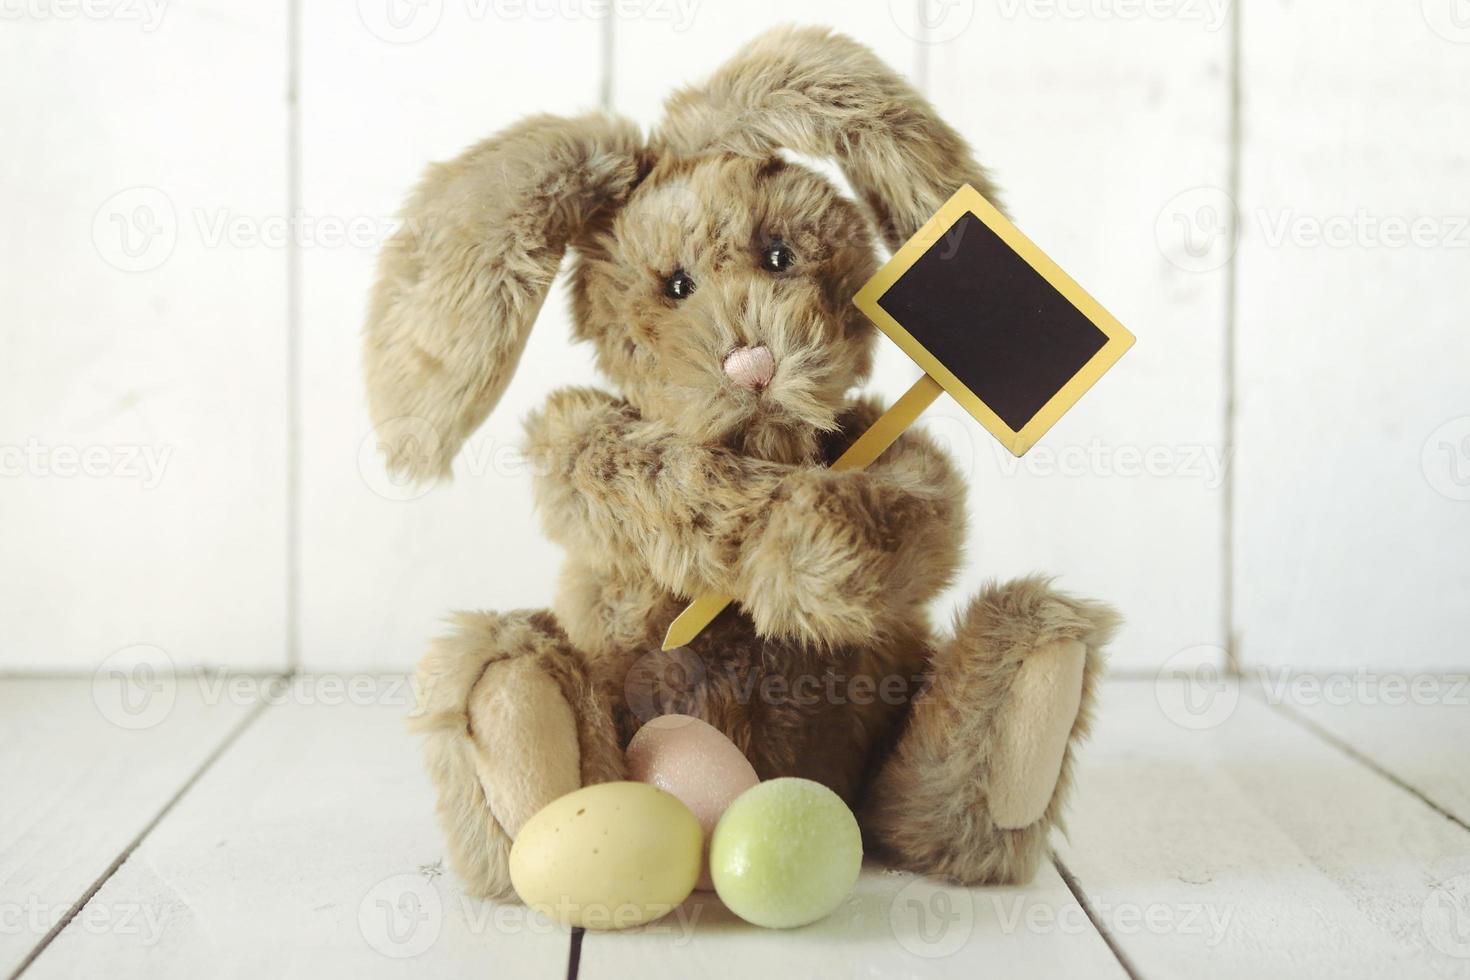 Easter Bunny Themed Holiday Occasion Image photo